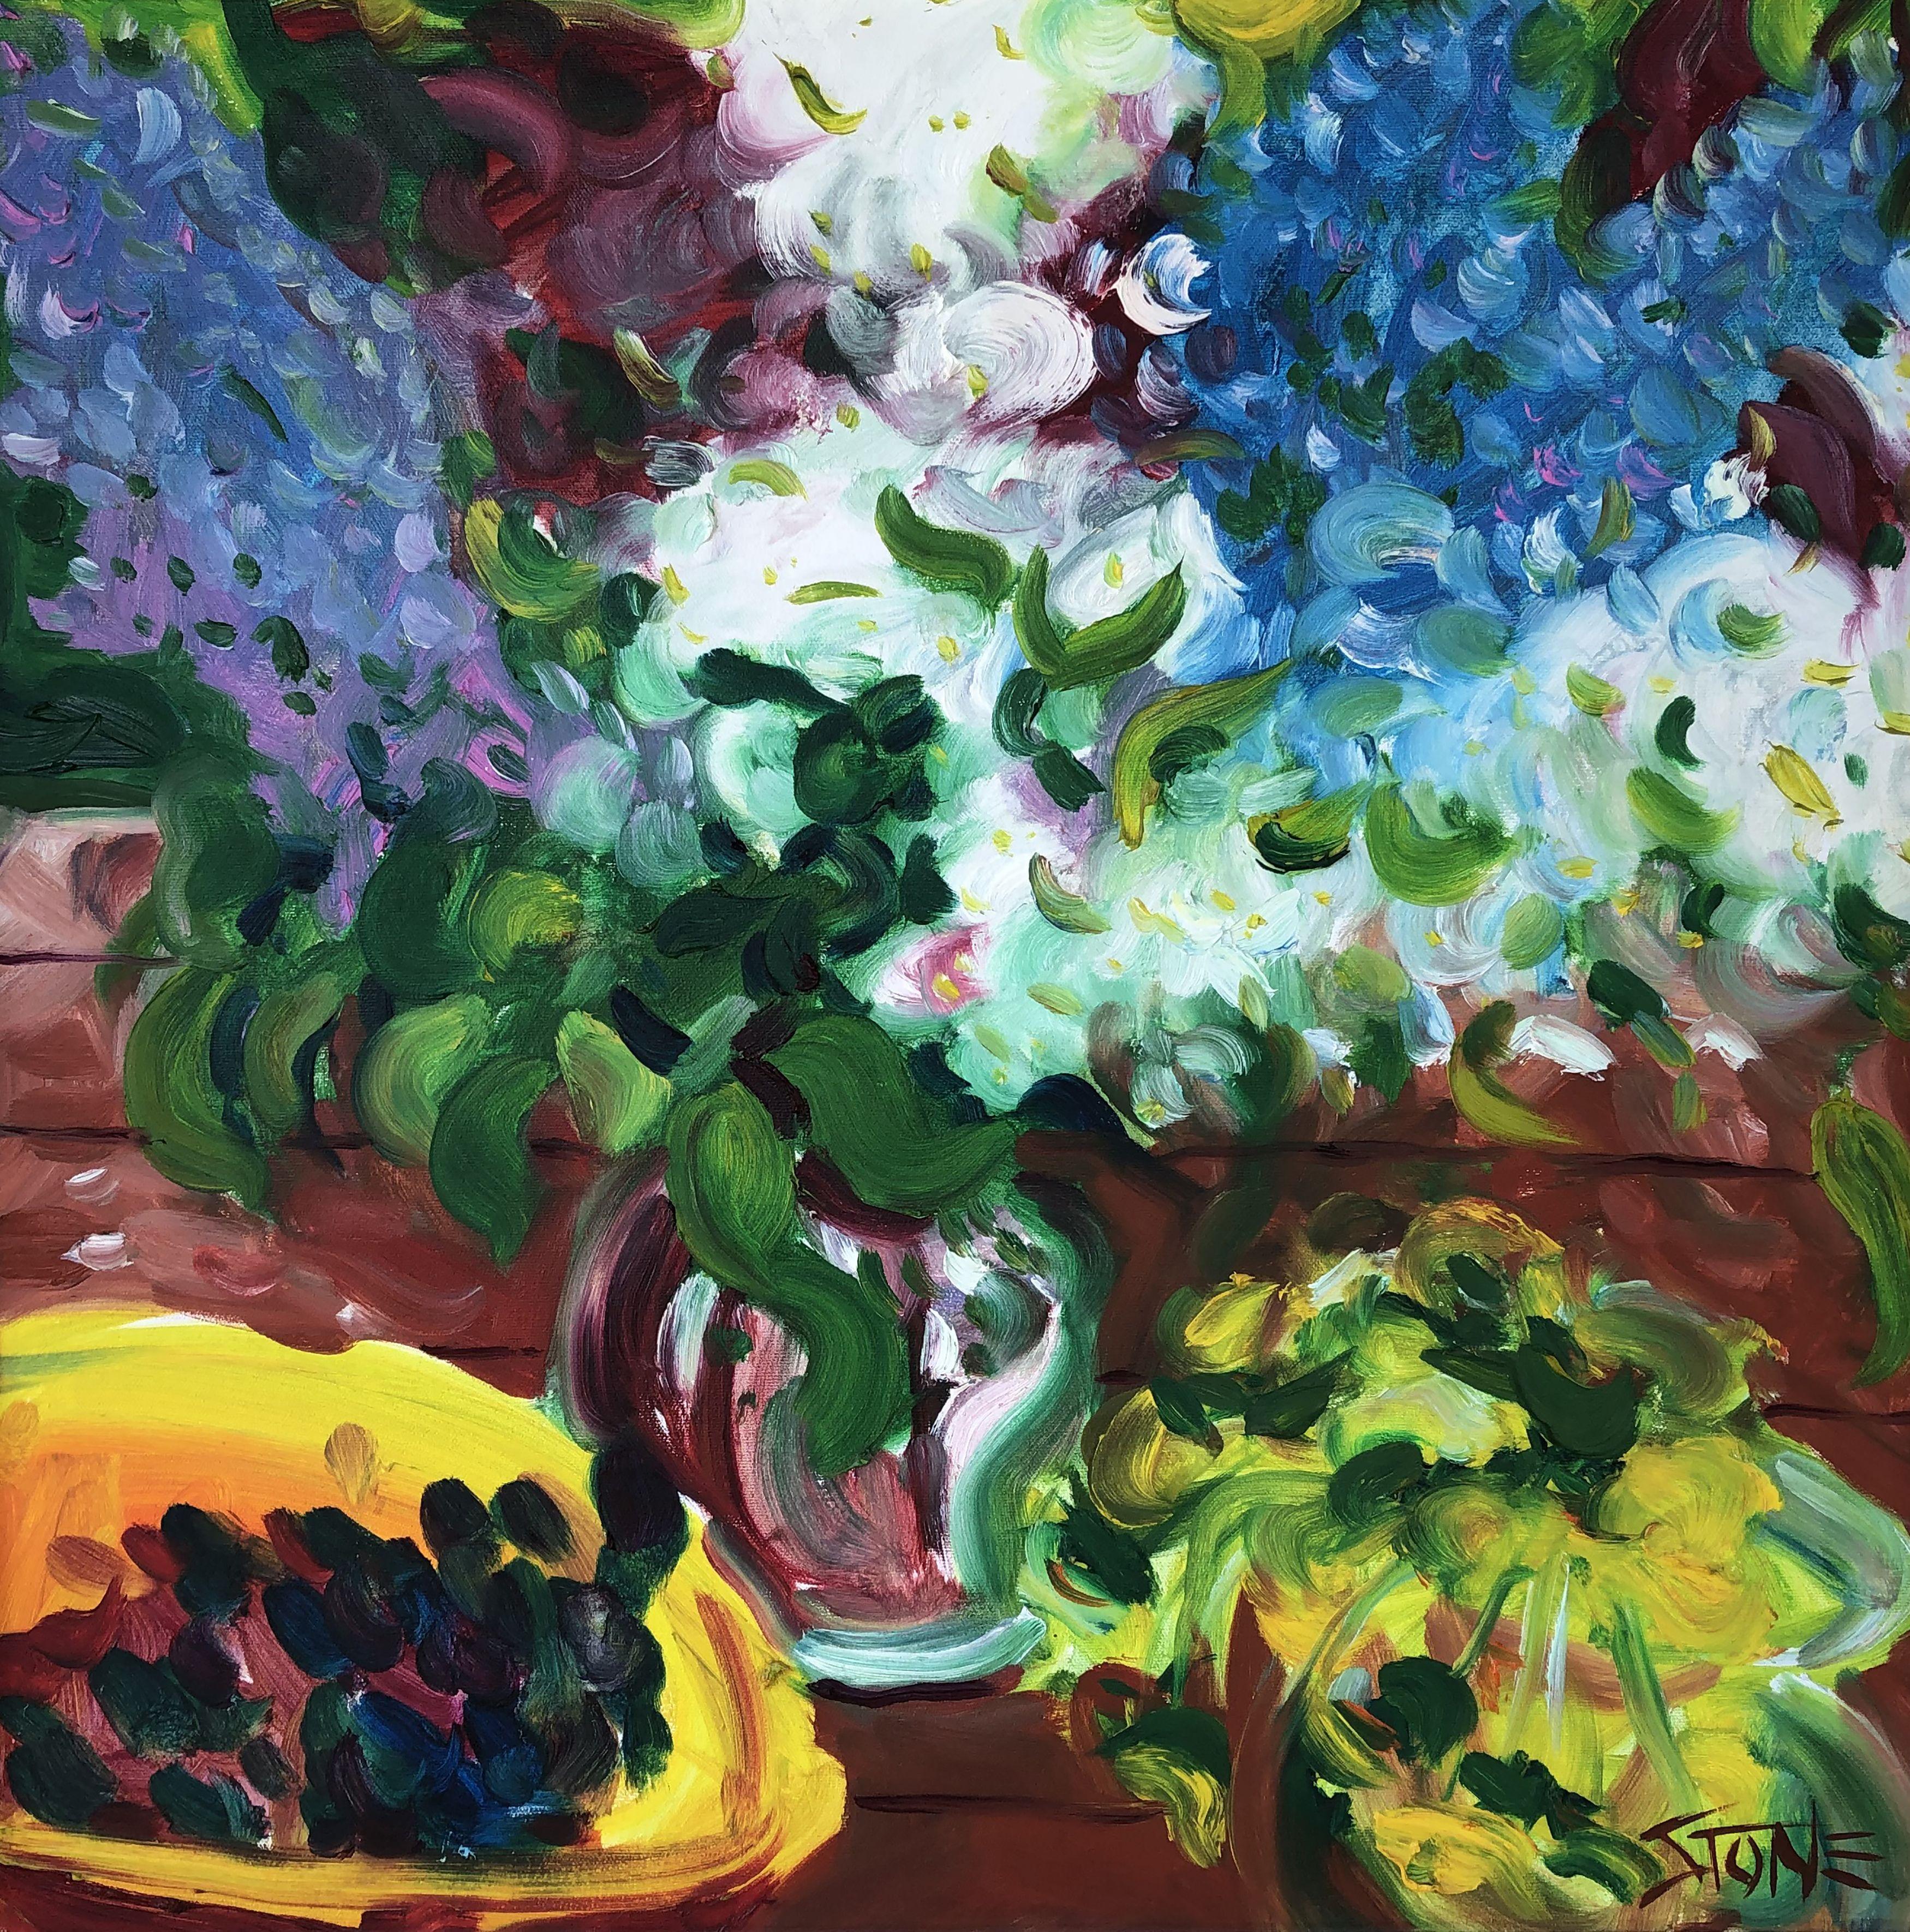 Mixed up flowers and berries sitting on a red table. :: Painting :: Impressionist :: This piece comes with an official certificate of authenticity signed by the artist :: Ready to Hang: Yes :: Signed: Yes :: Signature Location: bottom right ::